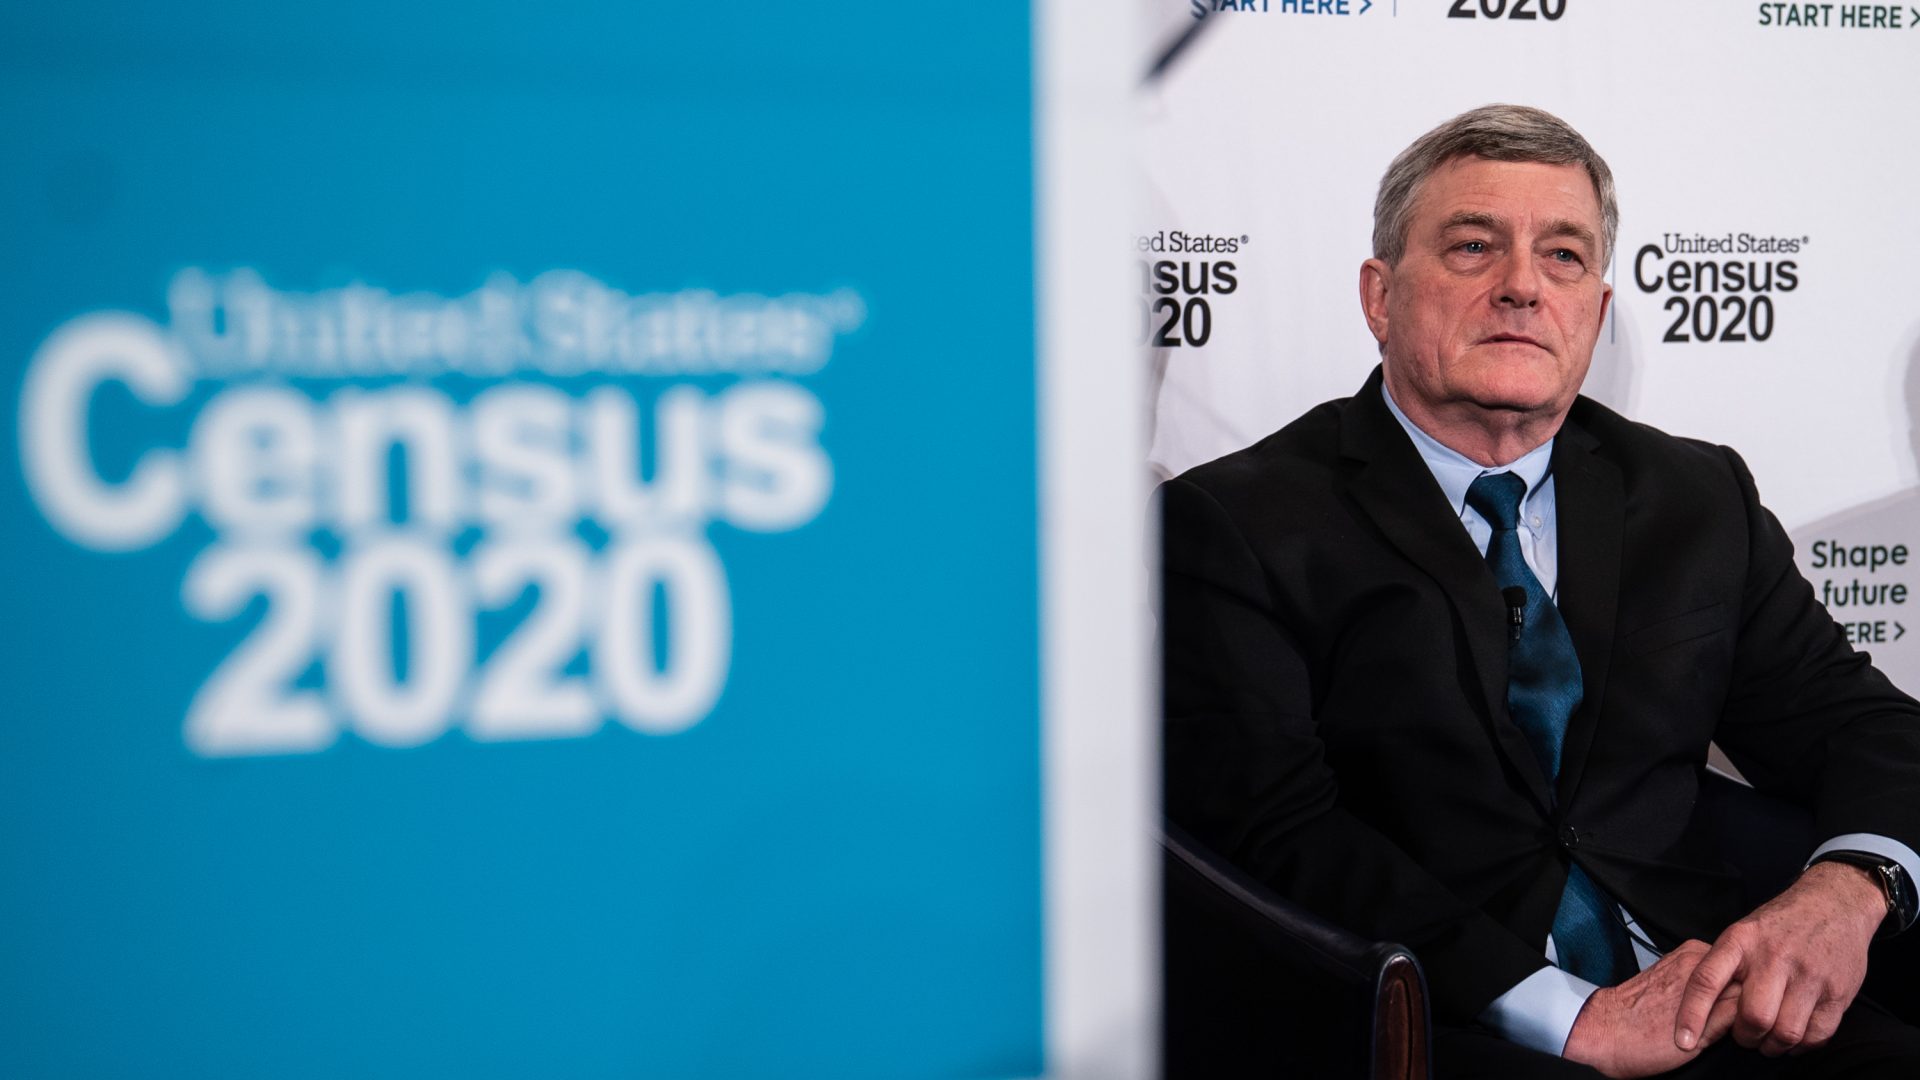 Census Bureau Director Steven Dillingham appears at a 2020 census event in April 2019. He says despite concerns, the bureau is on track to carry out the first primarily online U.S. census with enough workers.